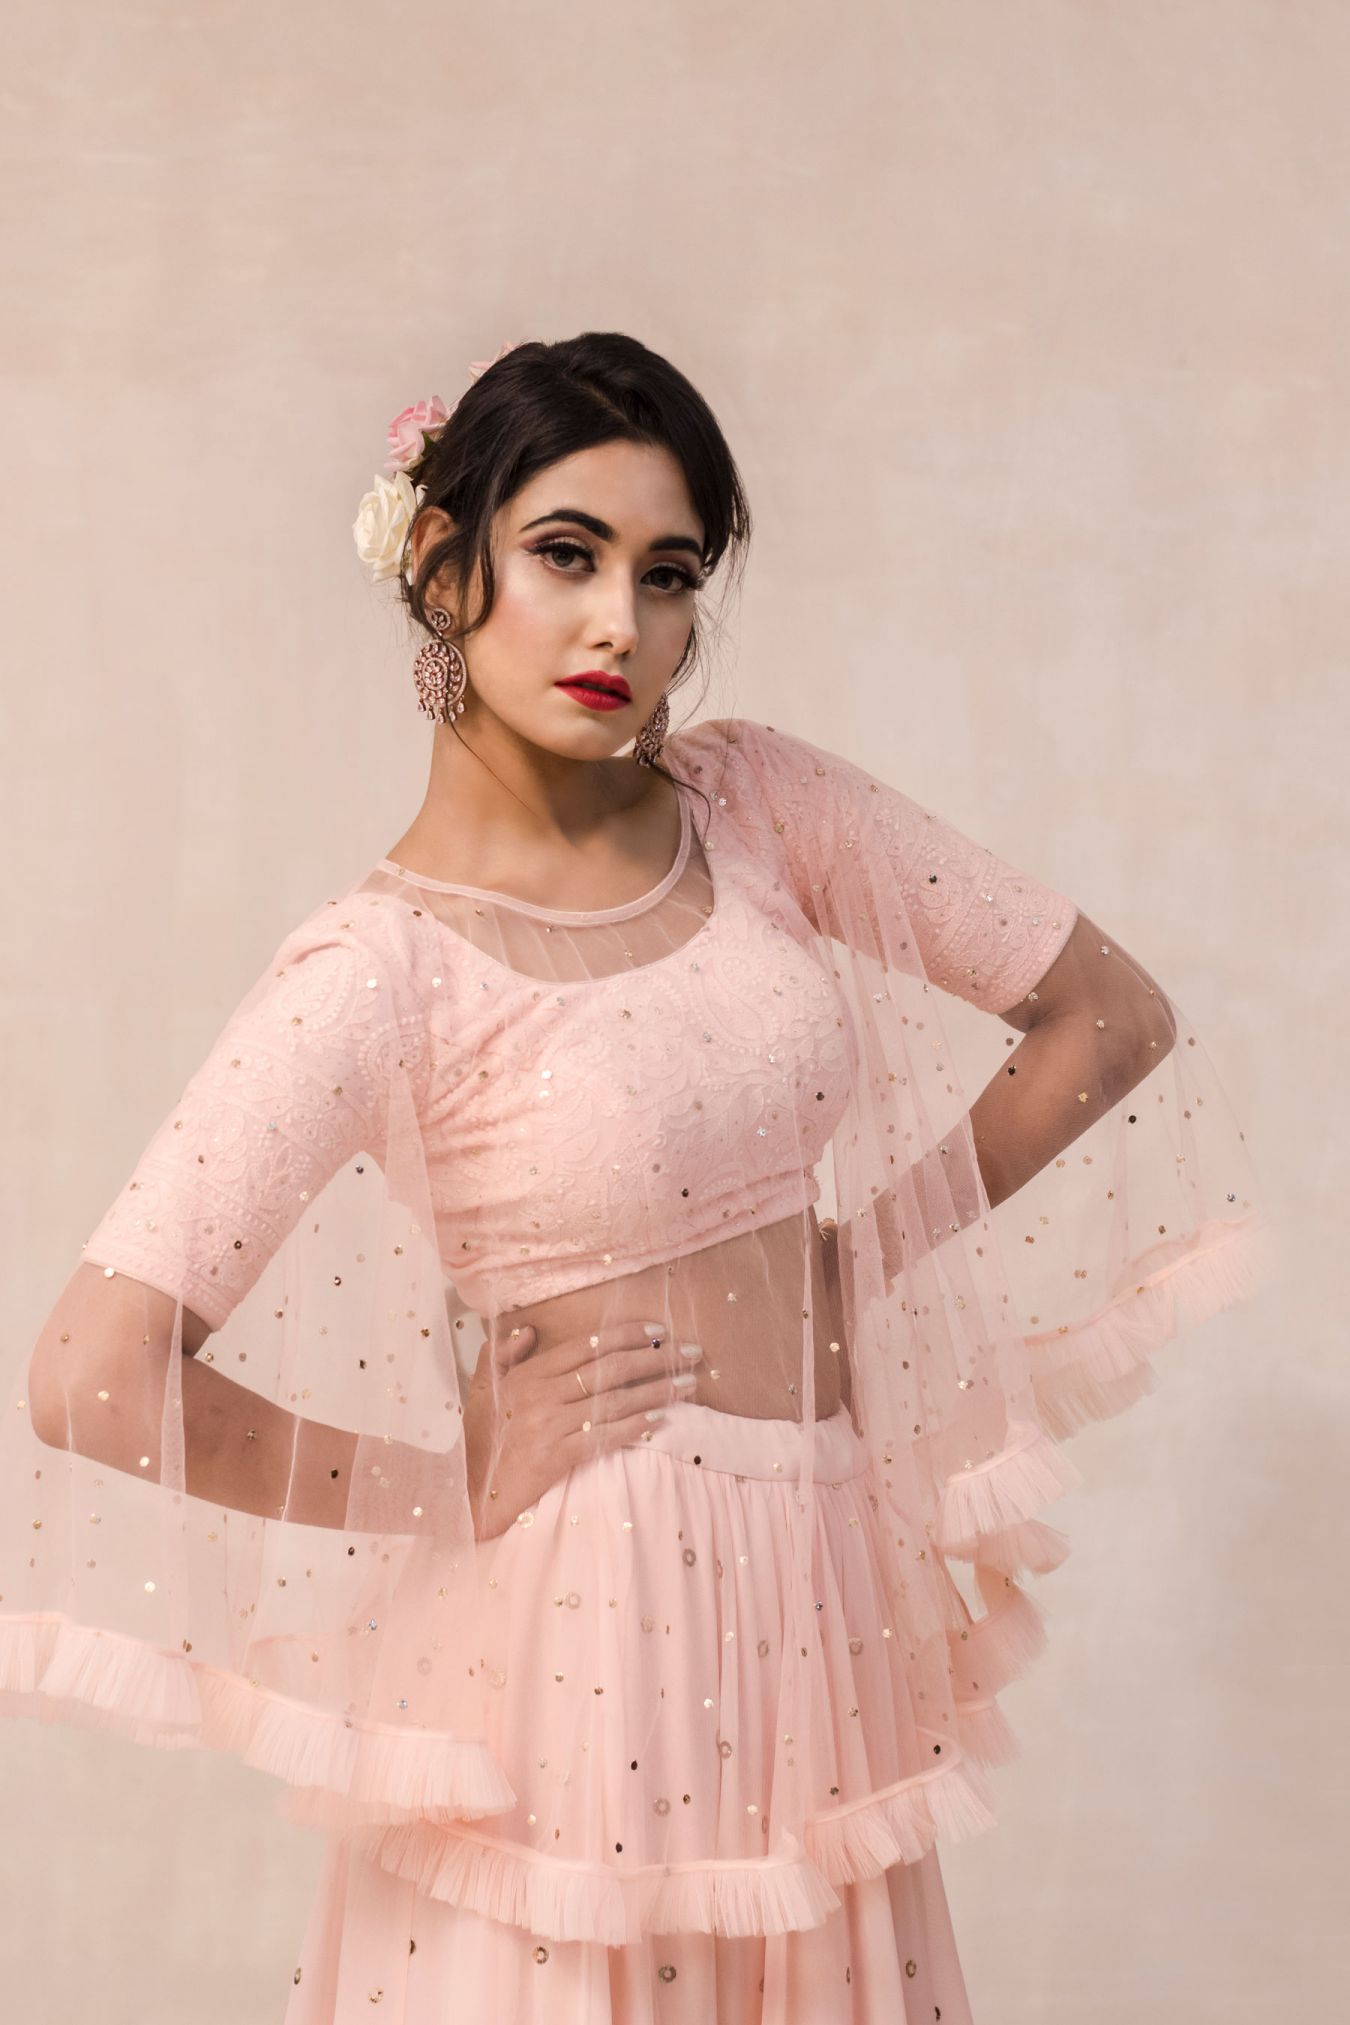 Vivacious Georgette Lehenga Paired with Handcrafted Chikan Blouse Embellished with Mukaish Rings All Over in Blooming Peach Color. Delicately Falling Sheer Cape with Frills for Accentuating the Style of the Whole Outfit